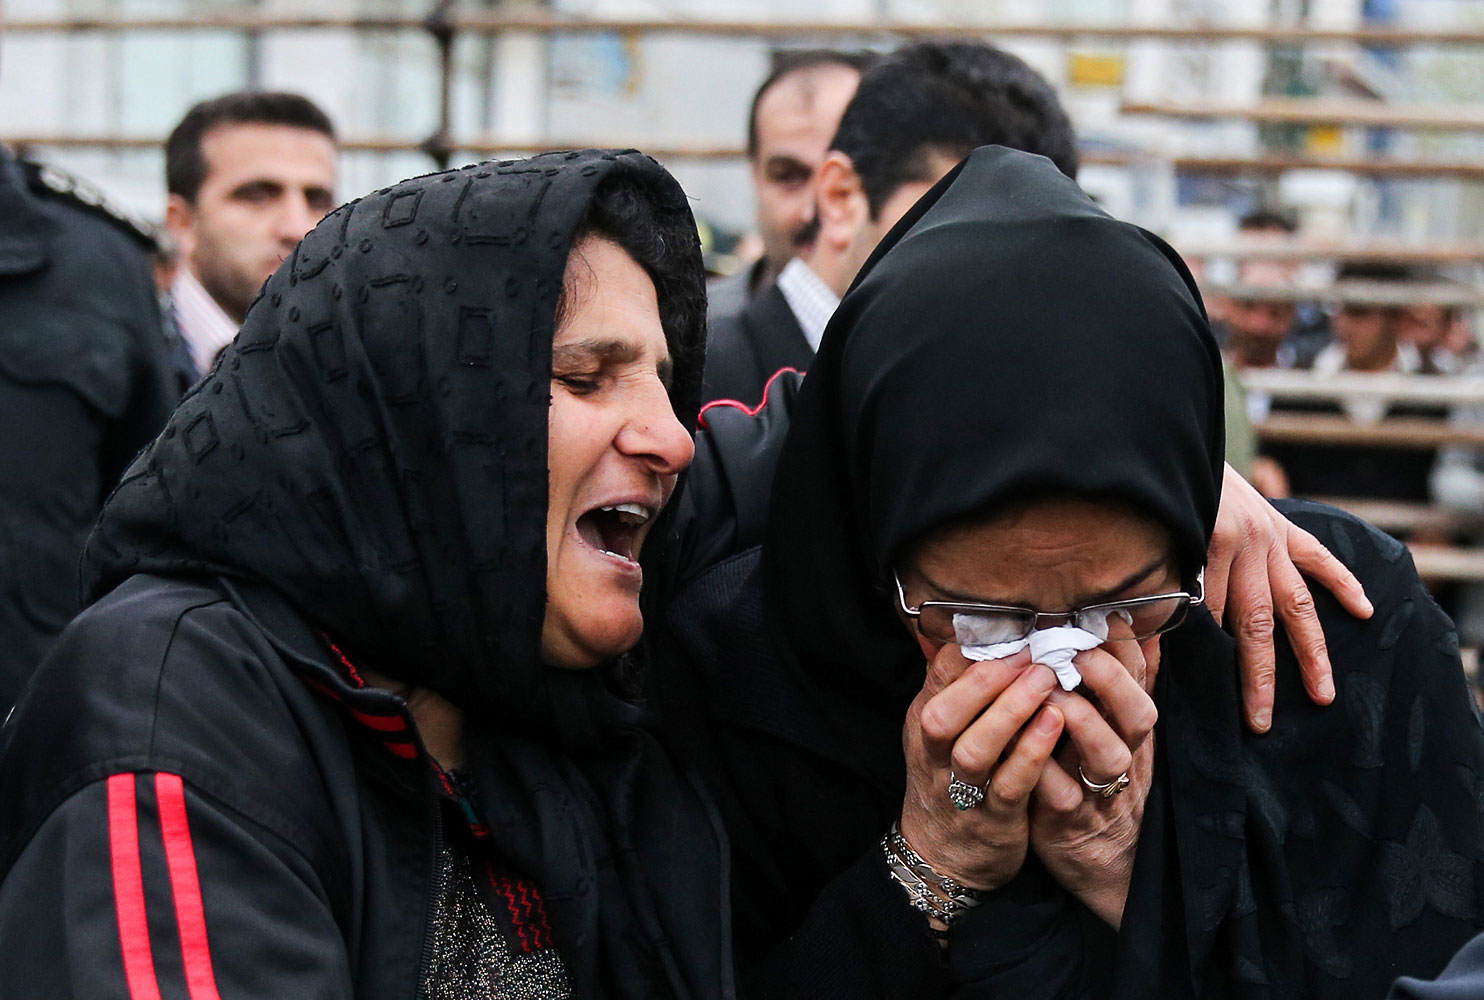 The mother of Balal cries with the mother of Abdolah Hosseinzadeh after she forgave Balal, giving him an emotional slap prior to removing the noose around his neck in the gallows during his execution ceremony in the northern city of Nowshahr on April 15, 2014.